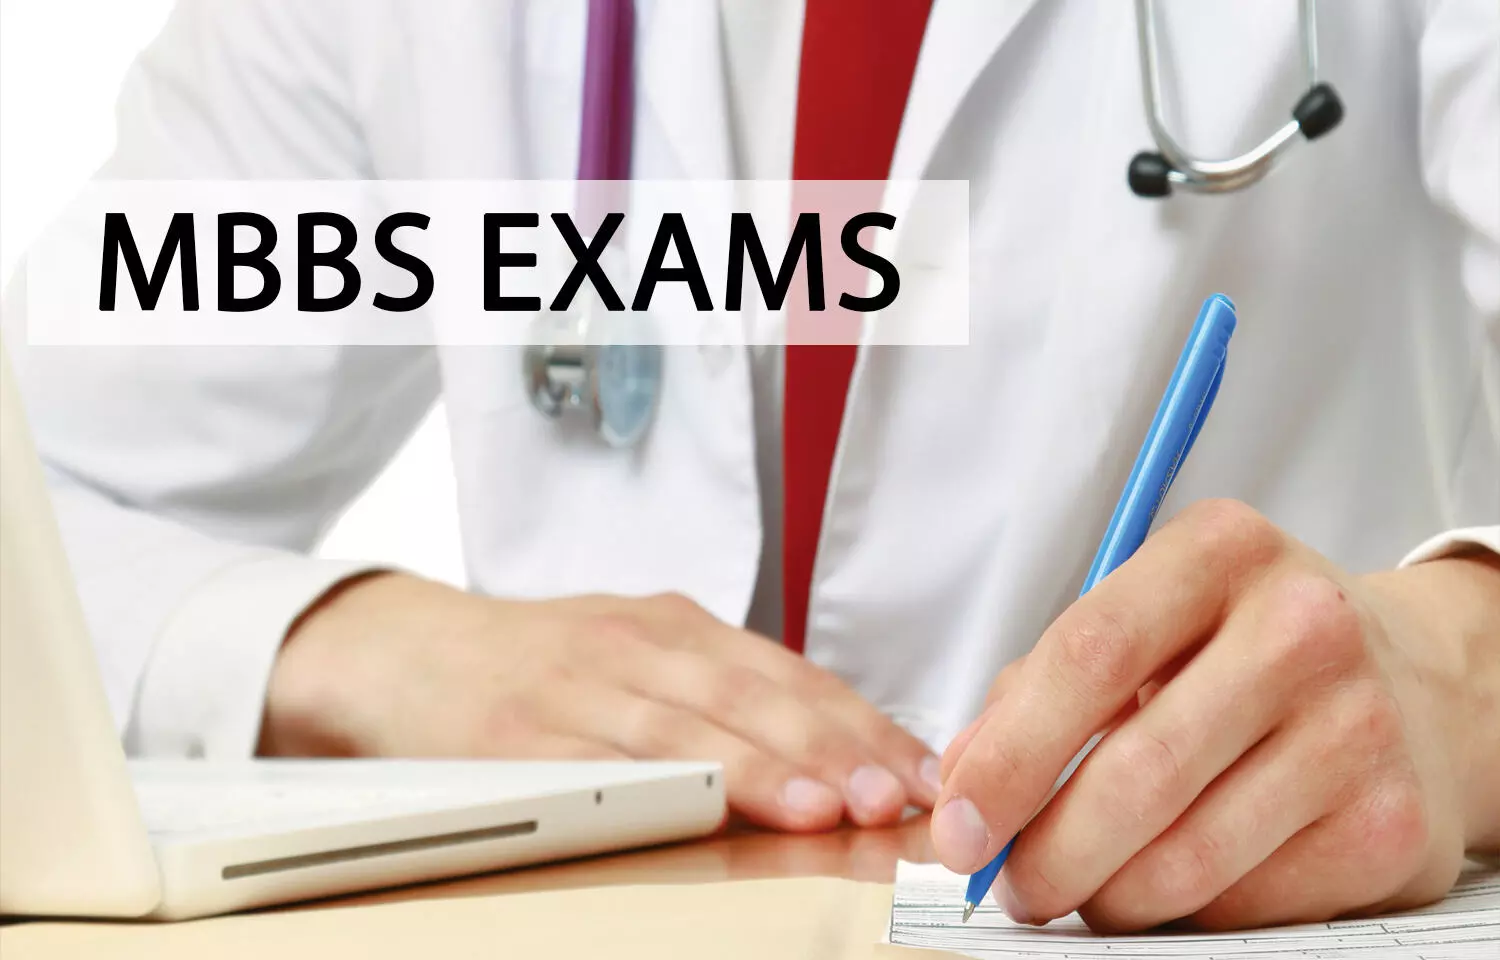 RGUHS releases Conduct of Phase 1 MBBS Resit Supplementary exams